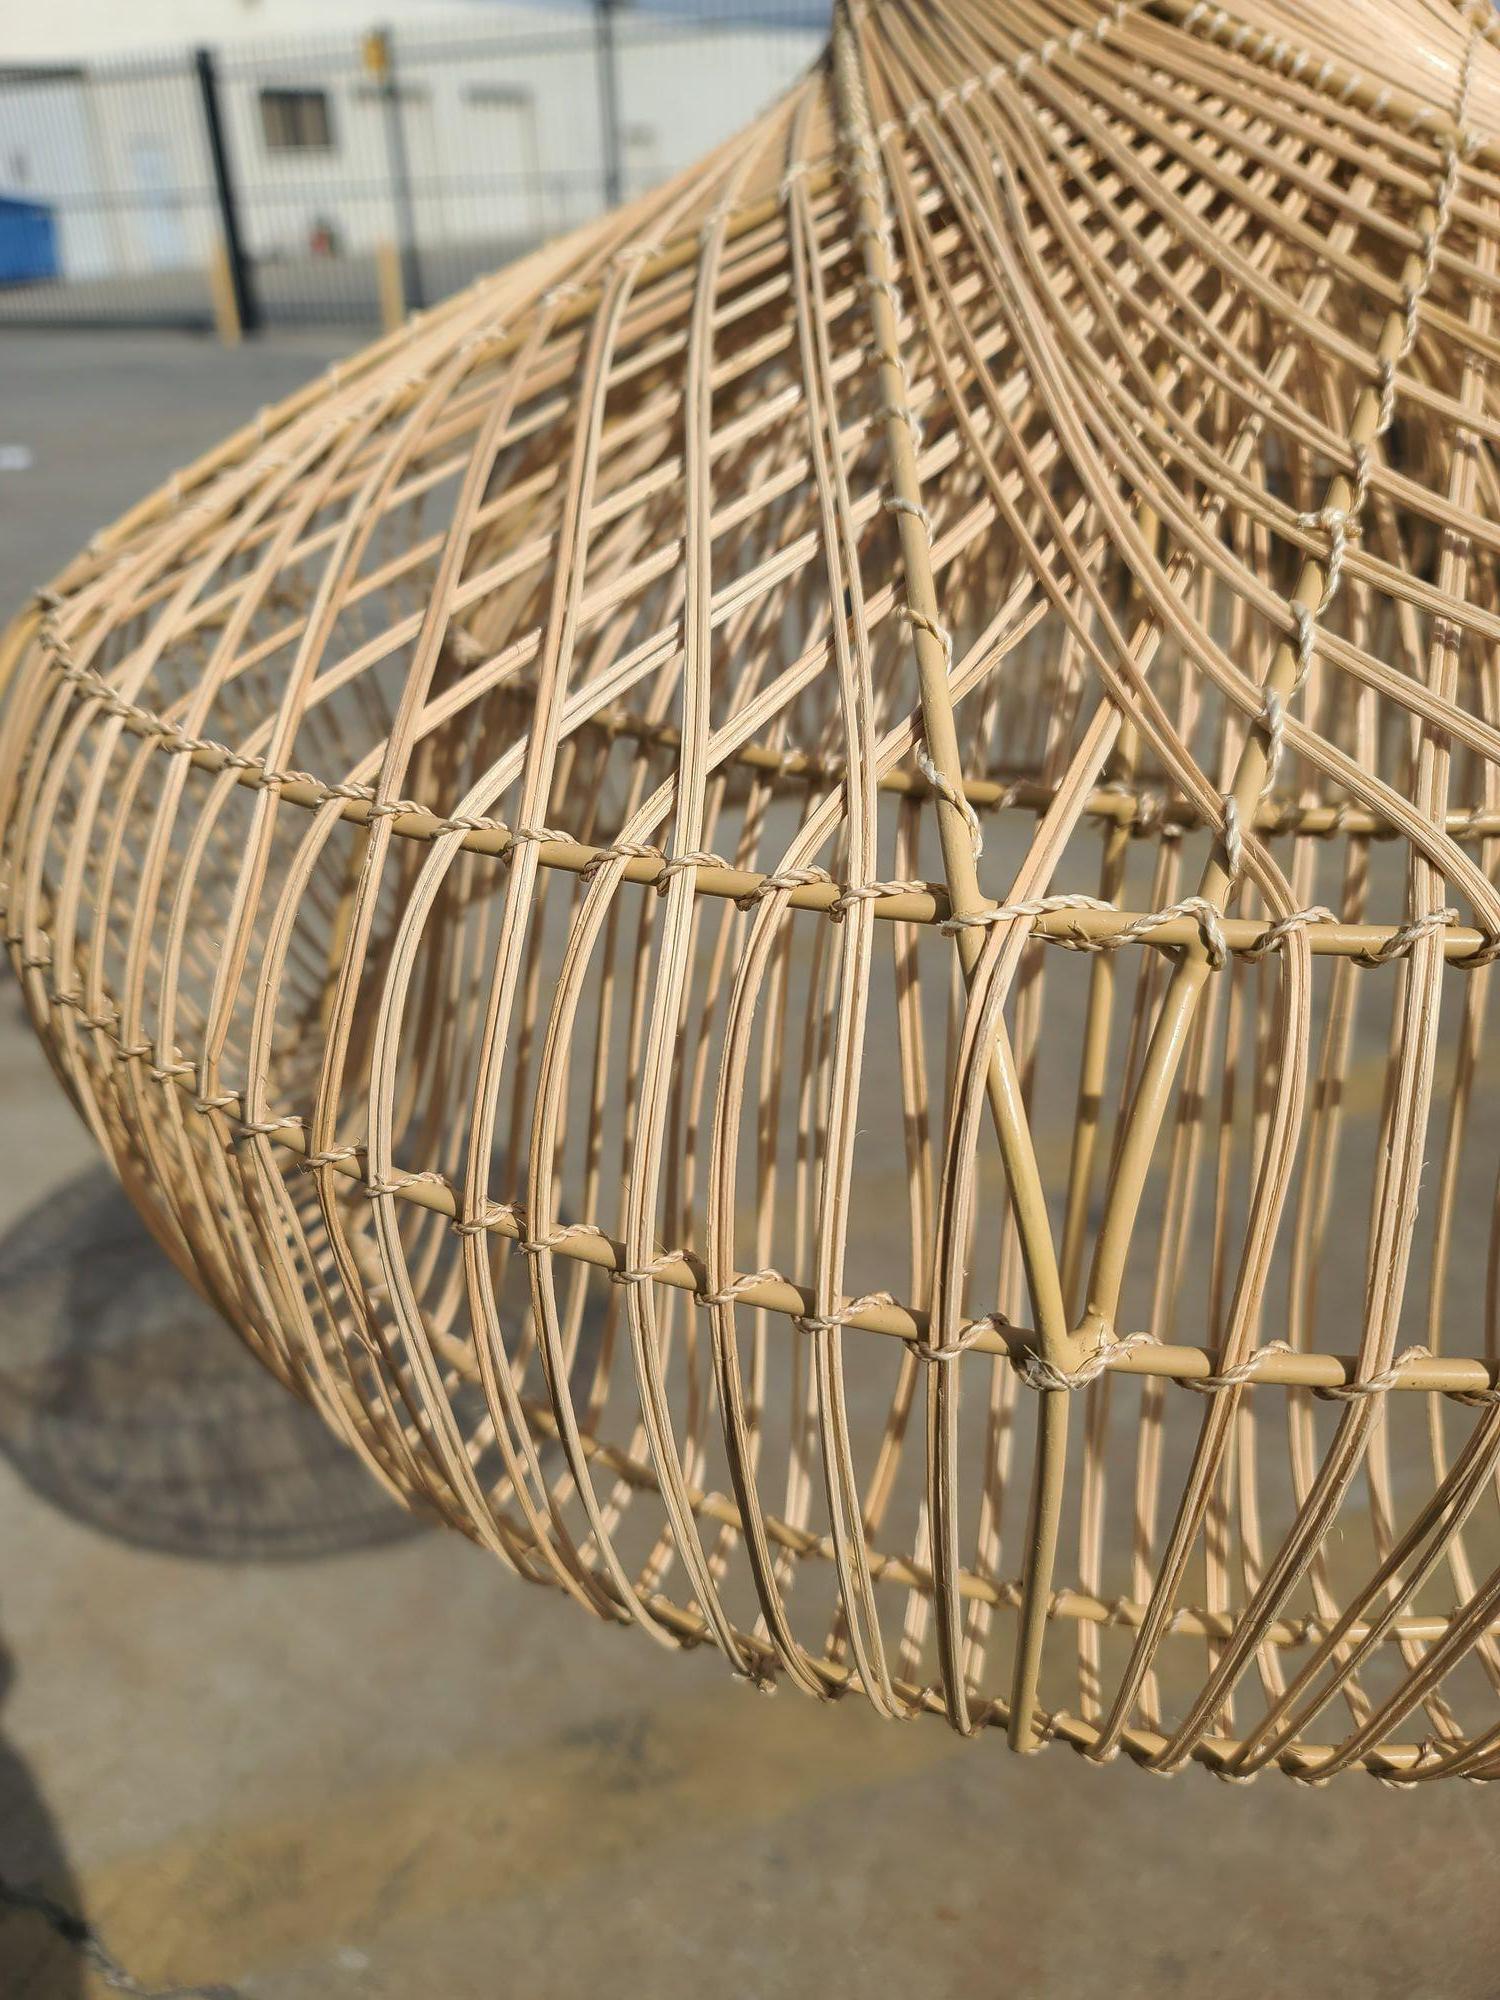 Original near-mint 1990s woven rattan hanging ceiling lamp pendant reminiscent of the style made famous by Franco Albini. The pendant features woven stick rattan pendant light hung from a black cloth-wrapped cord connected to a black ceiling plate.